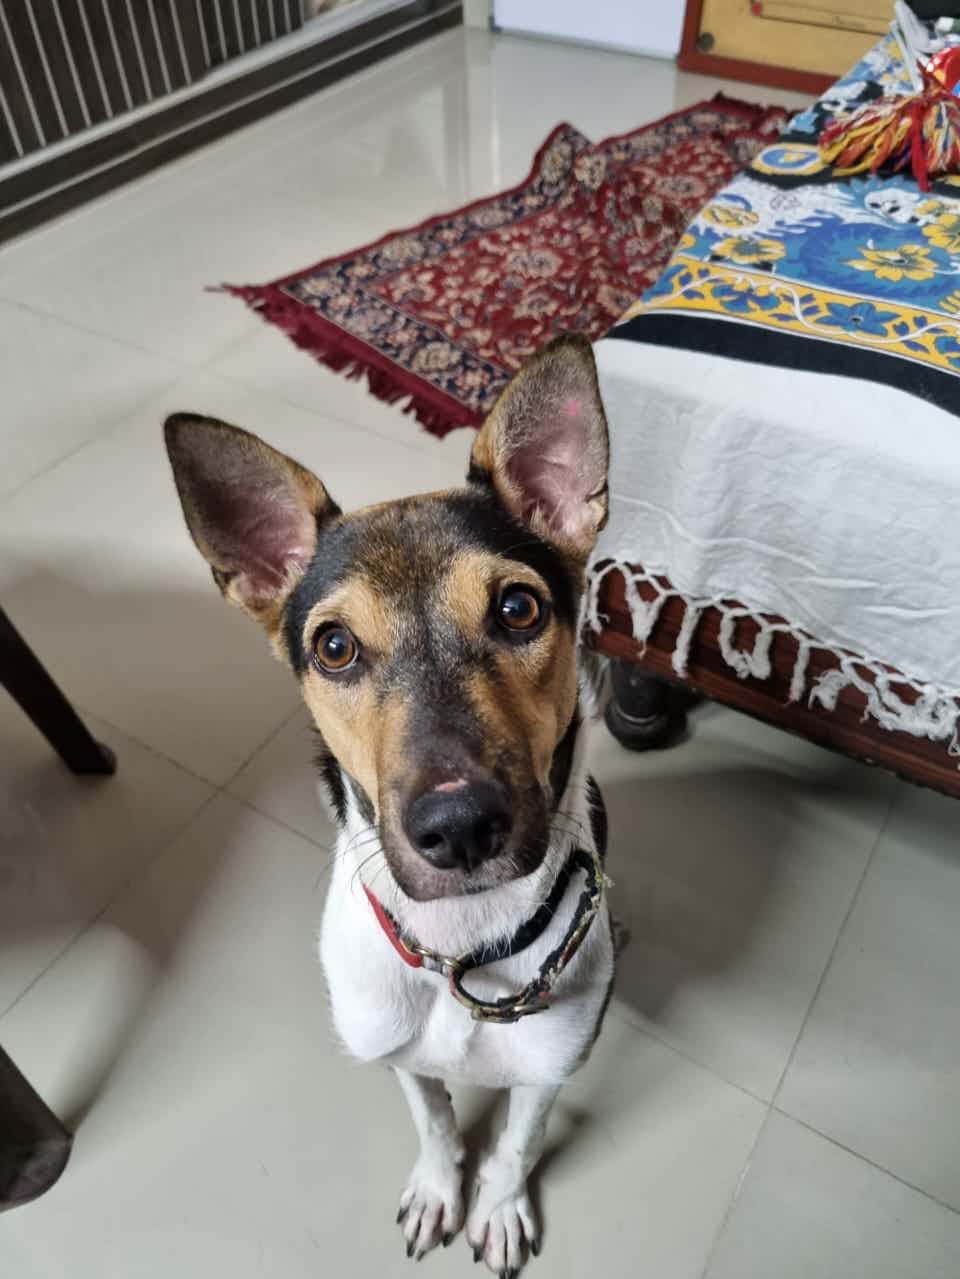 Bangalore adoption appeal : Anyone looking for a older handsome pup ? 

Figo is the one ! He’s 7 months old male indie 

He loves his family 

He is sterlized, vaccinated & healthy 

He’s a quick learner & Infact trained 

He’s dog friendly 🦴 

He will love to play catch with your pet 

To adopt him WhatsApp 9110698650 / 9739509193